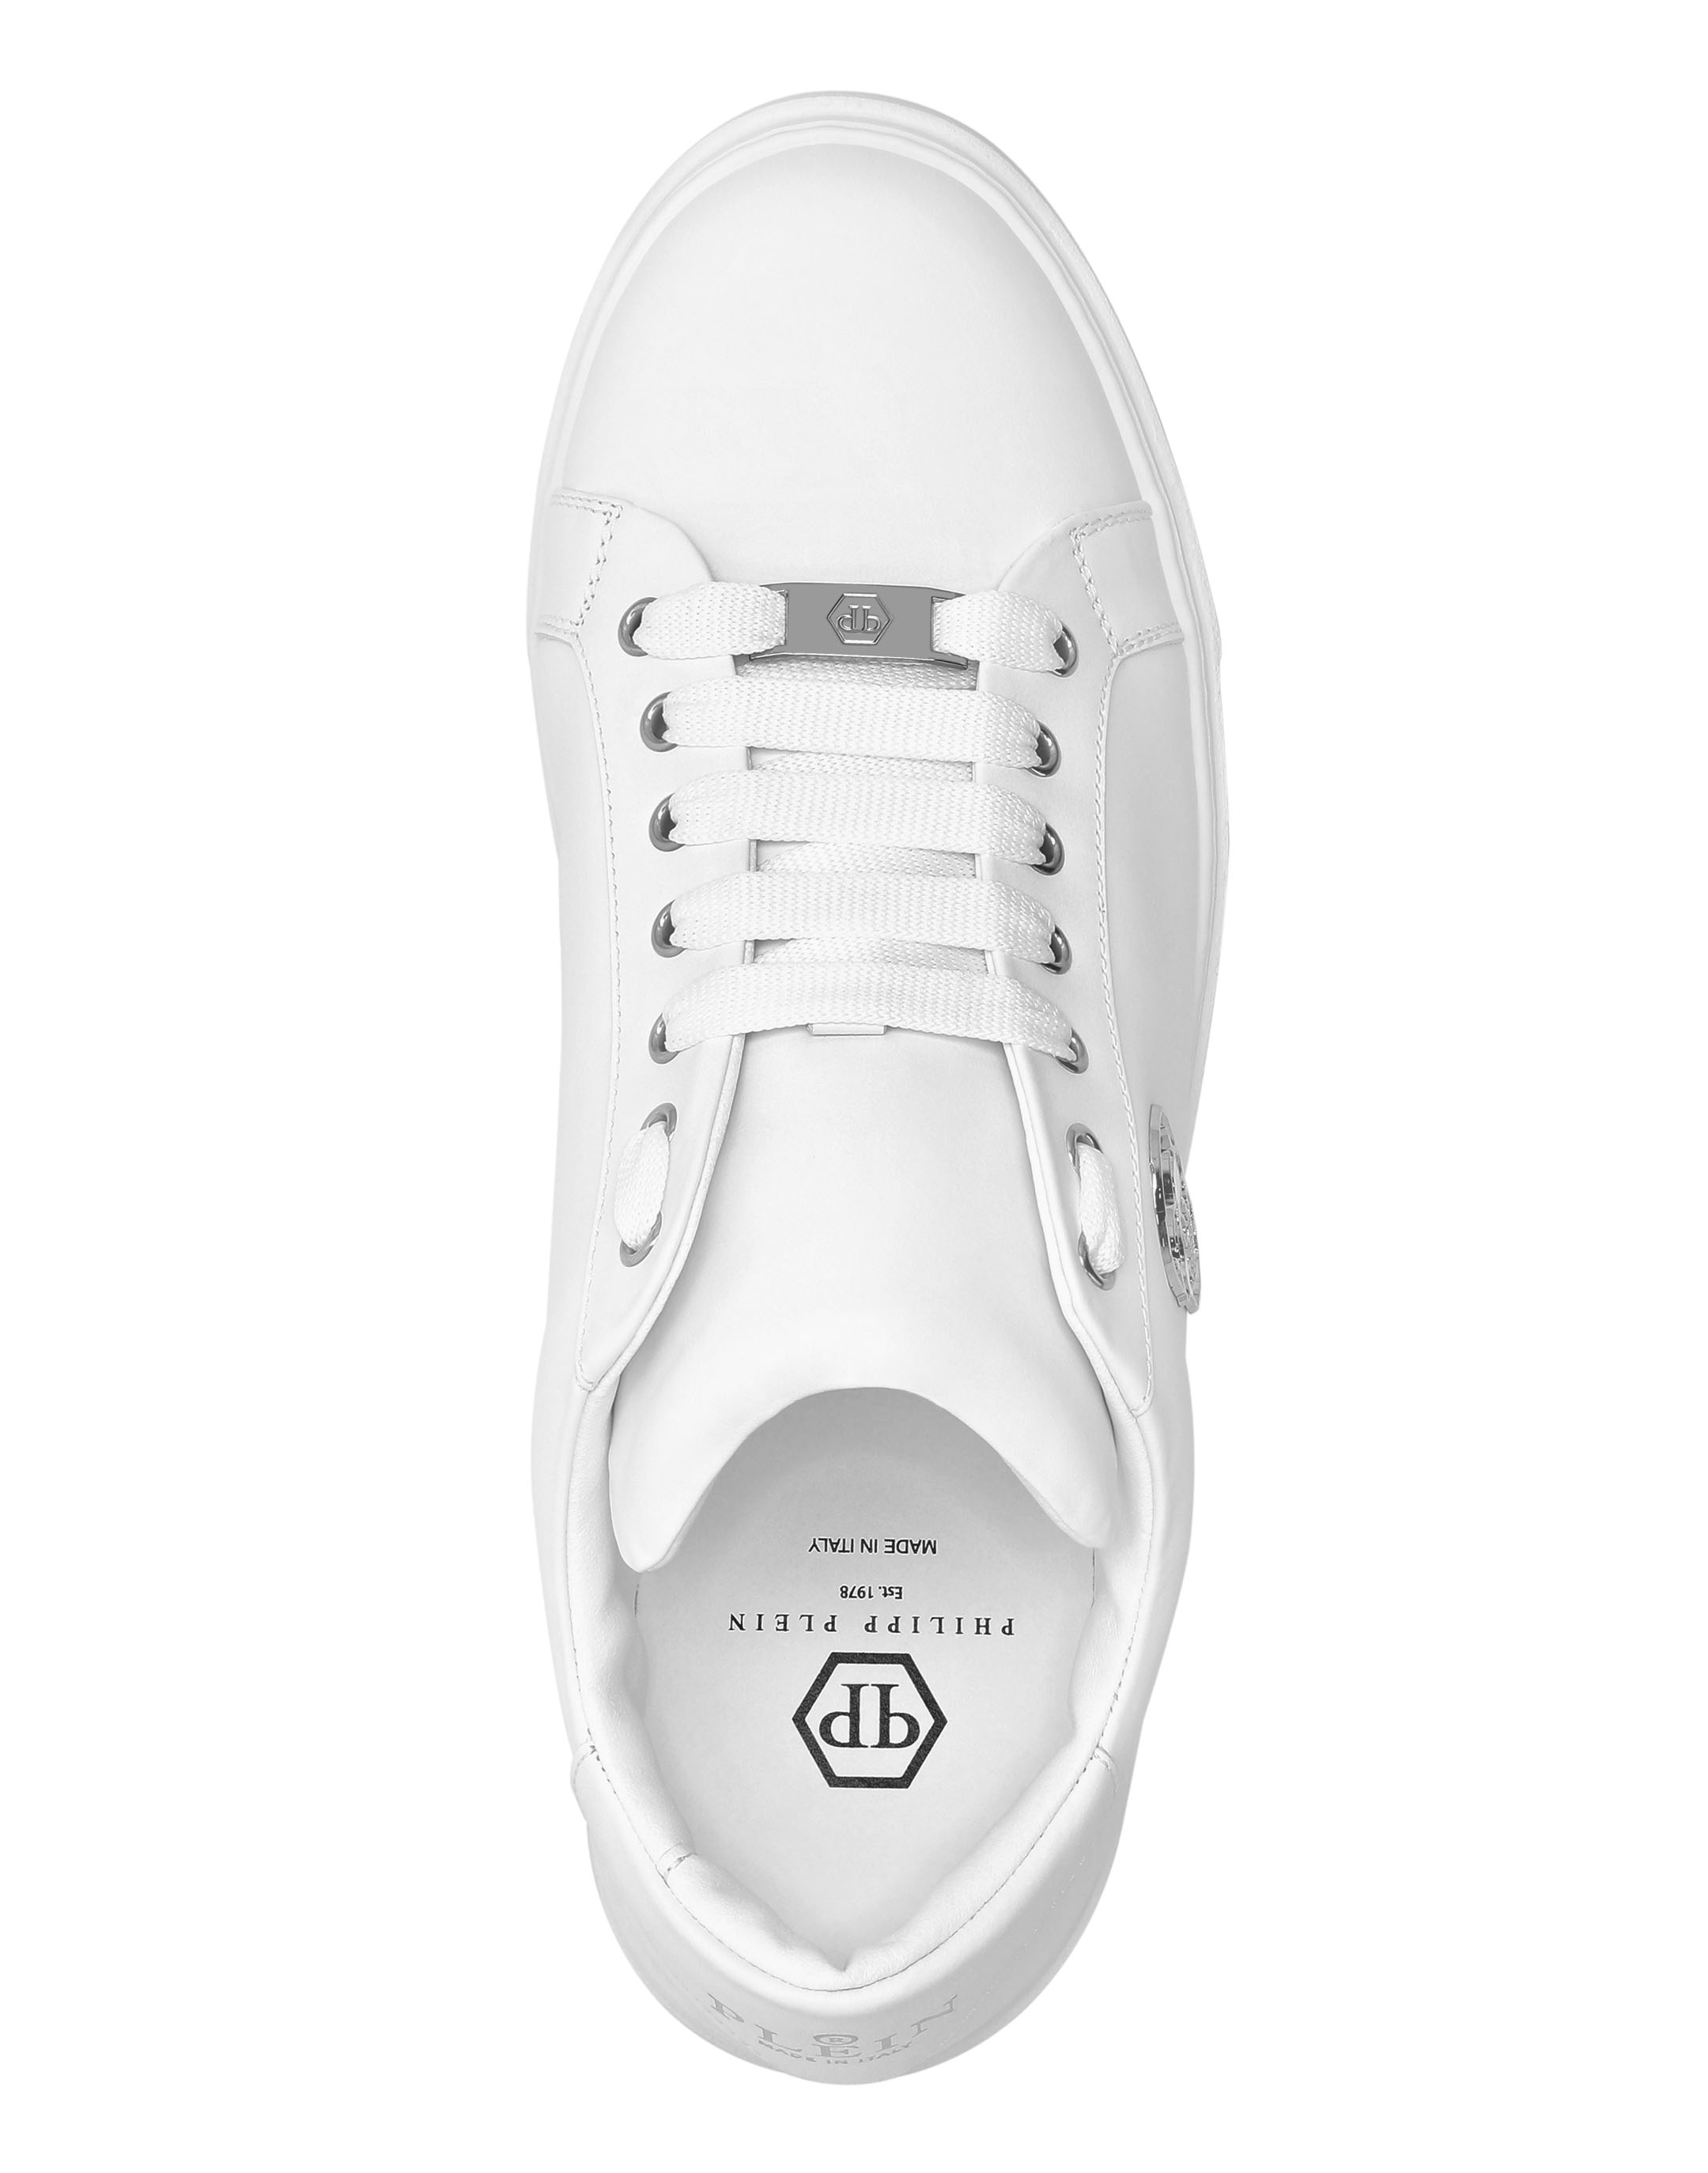 Lo-Top Sneakers Skull | Philipp Plein Outlet